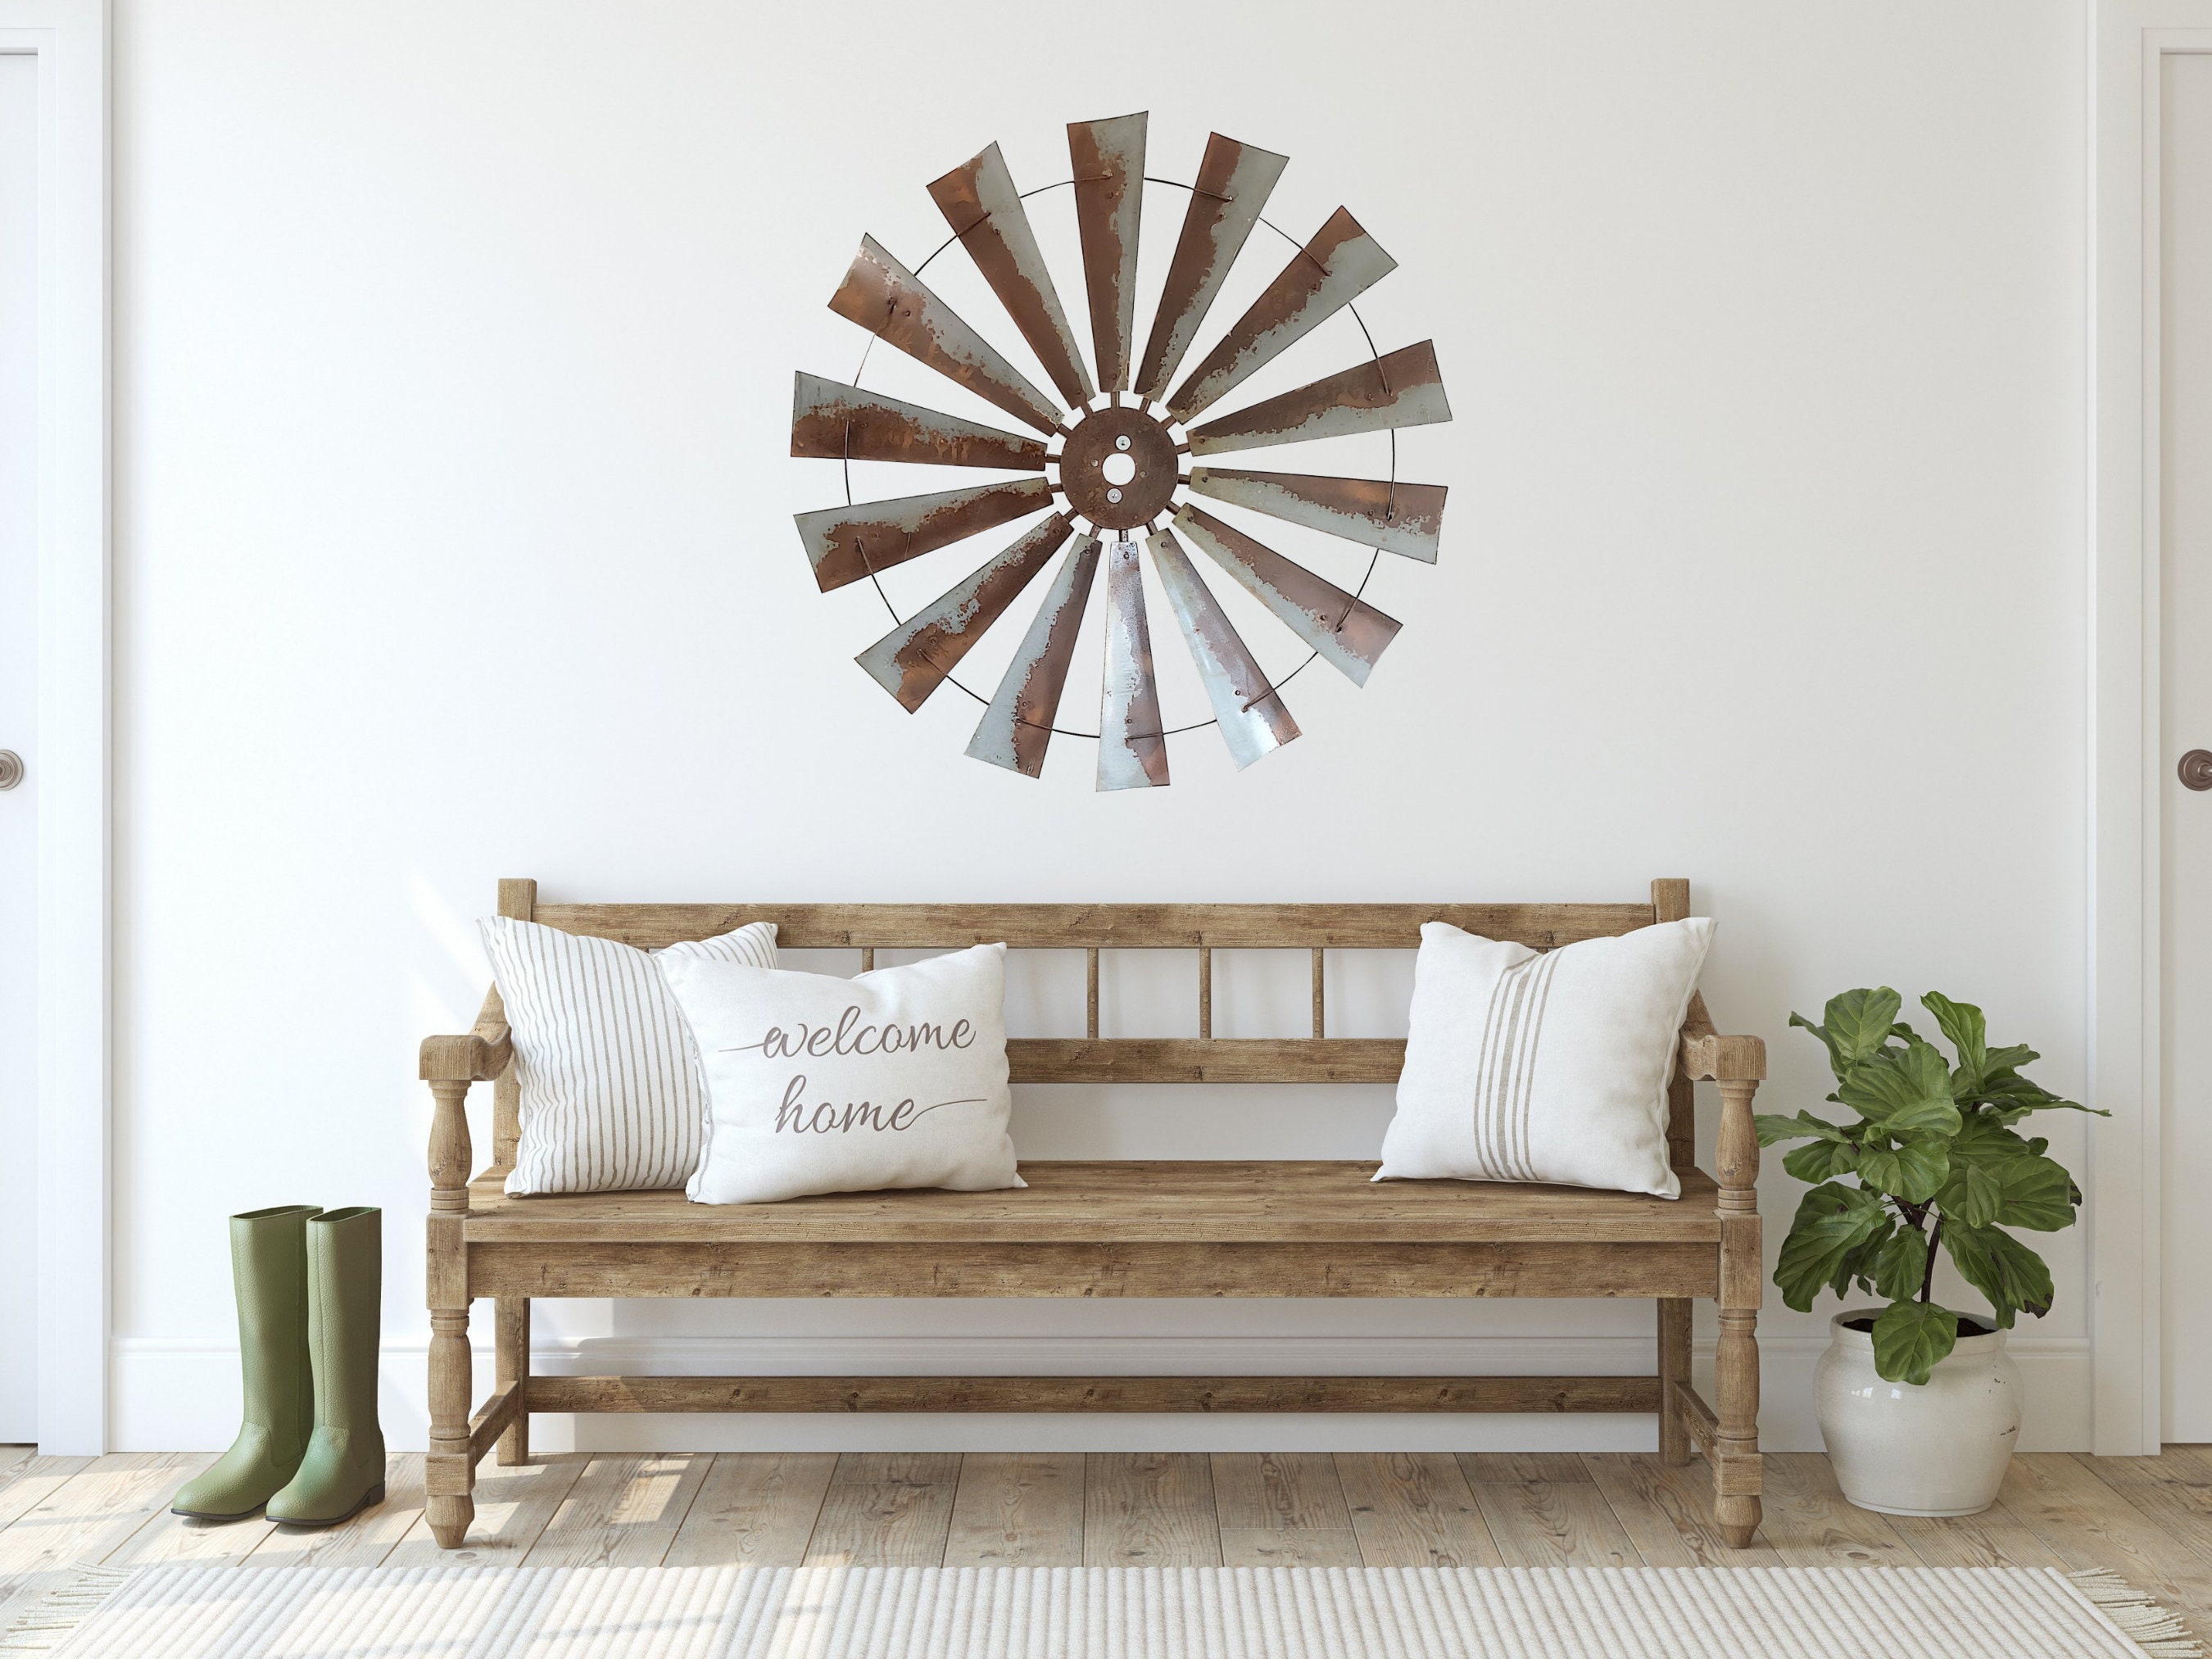 Farmhouse Style Windmill Wall Decor, Rustic Windmill Blade Wall Art, Vintage Look Authentic Windmill, Farmhouse Kitchen Decor, Rustic Art